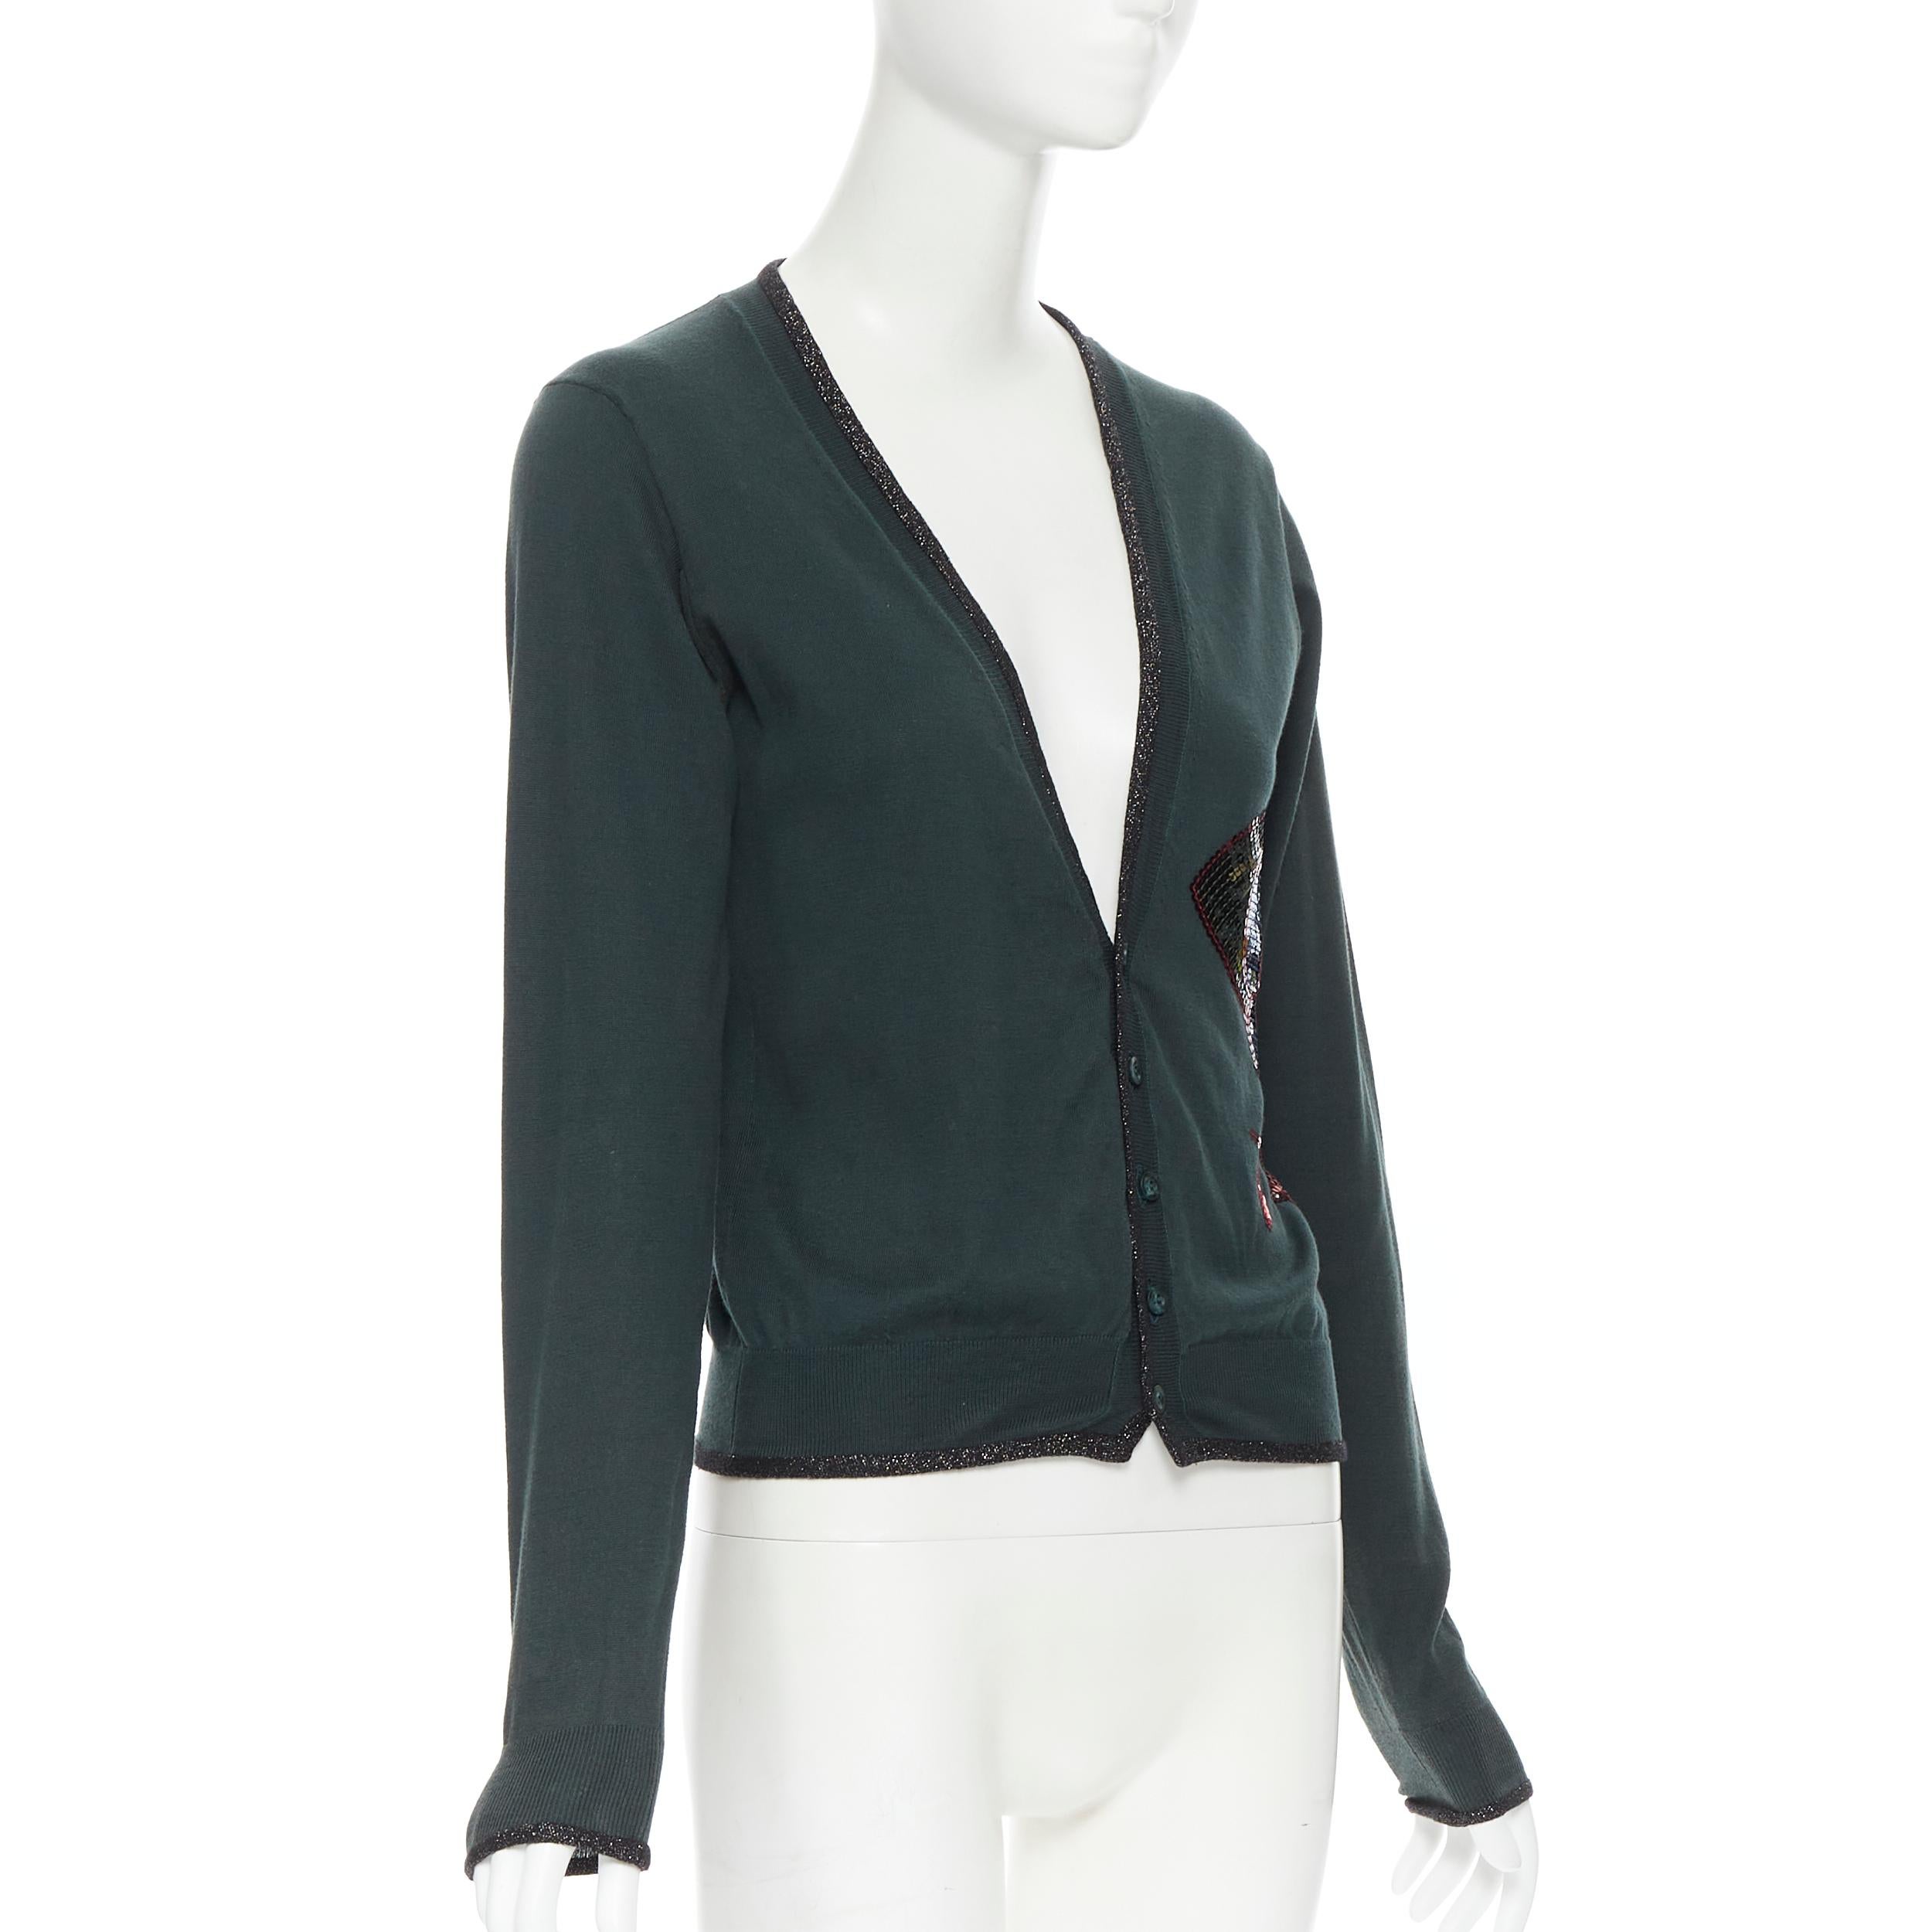 UNDERCOVER dark green cotton sequins floral patch lurex trimmed cardigan JP1 S 
Reference: CAWG/A00177 
Brand: Undercover 
Material: Cotton 
Color: Green 
Pattern: Solid 
Closure: Button 
Extra Detail: Lurex black trimming. Button front closure.